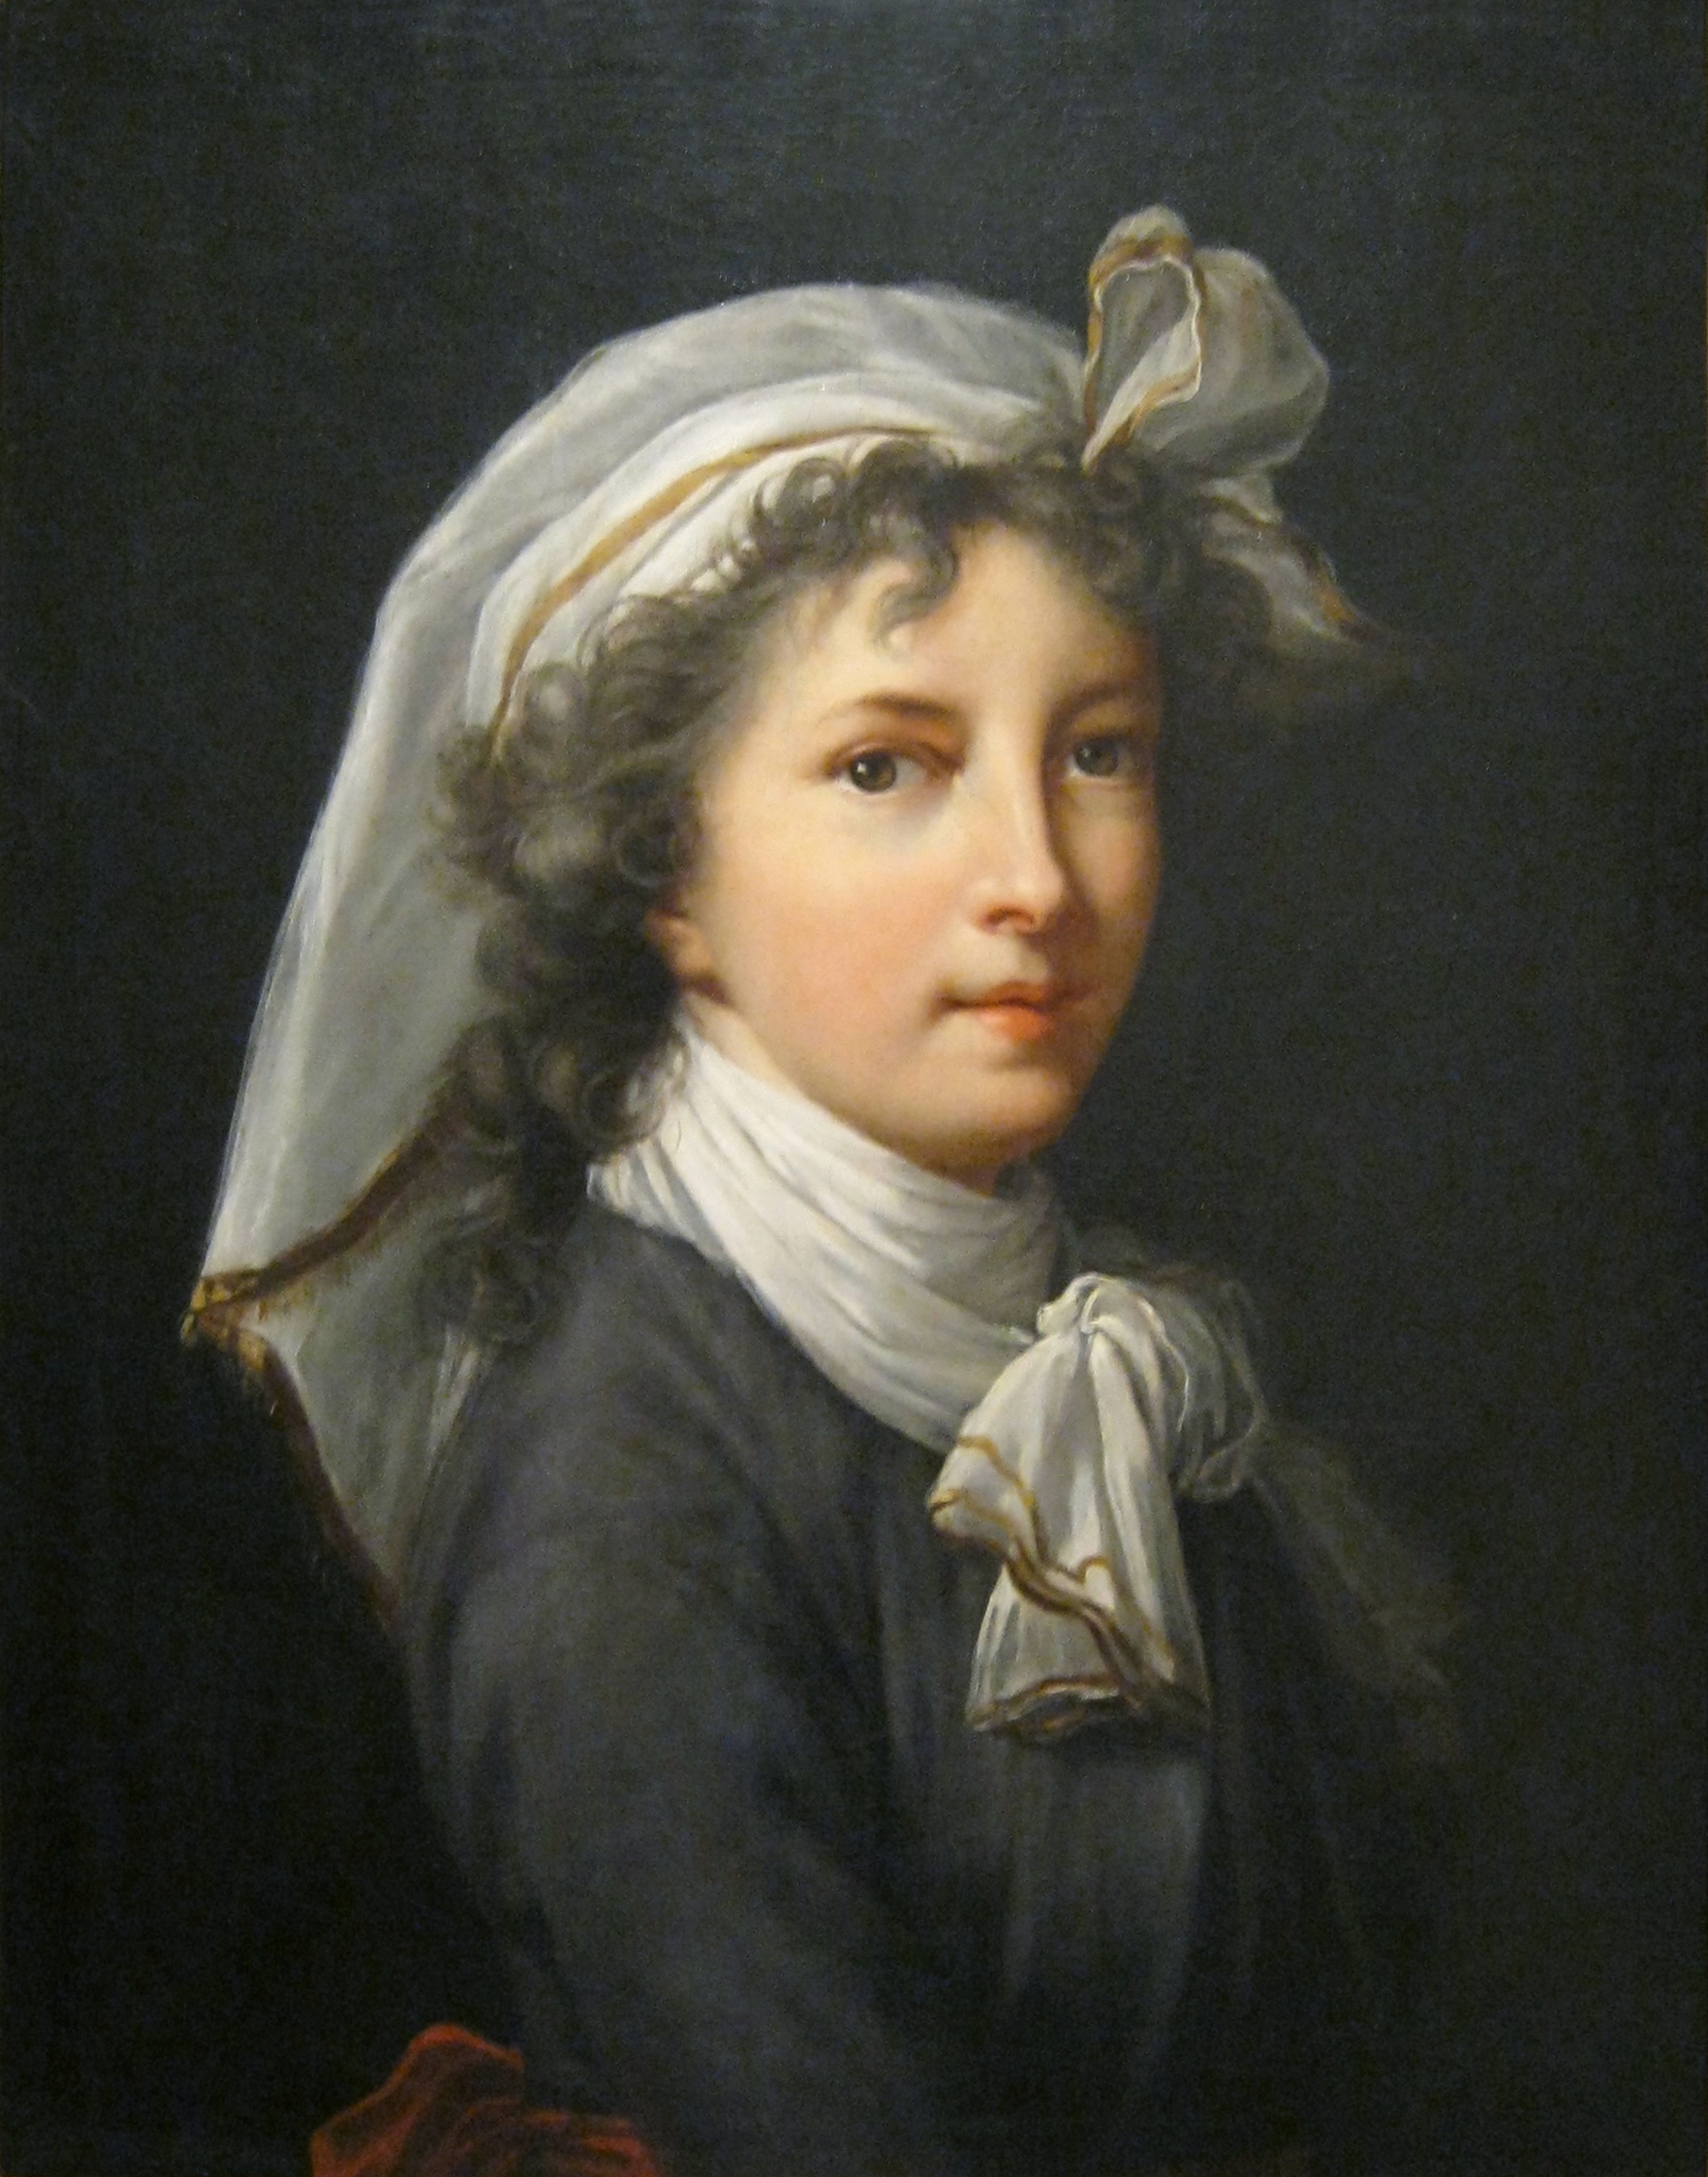 Self portrait showing woman wearing a headscarf and neckerchief